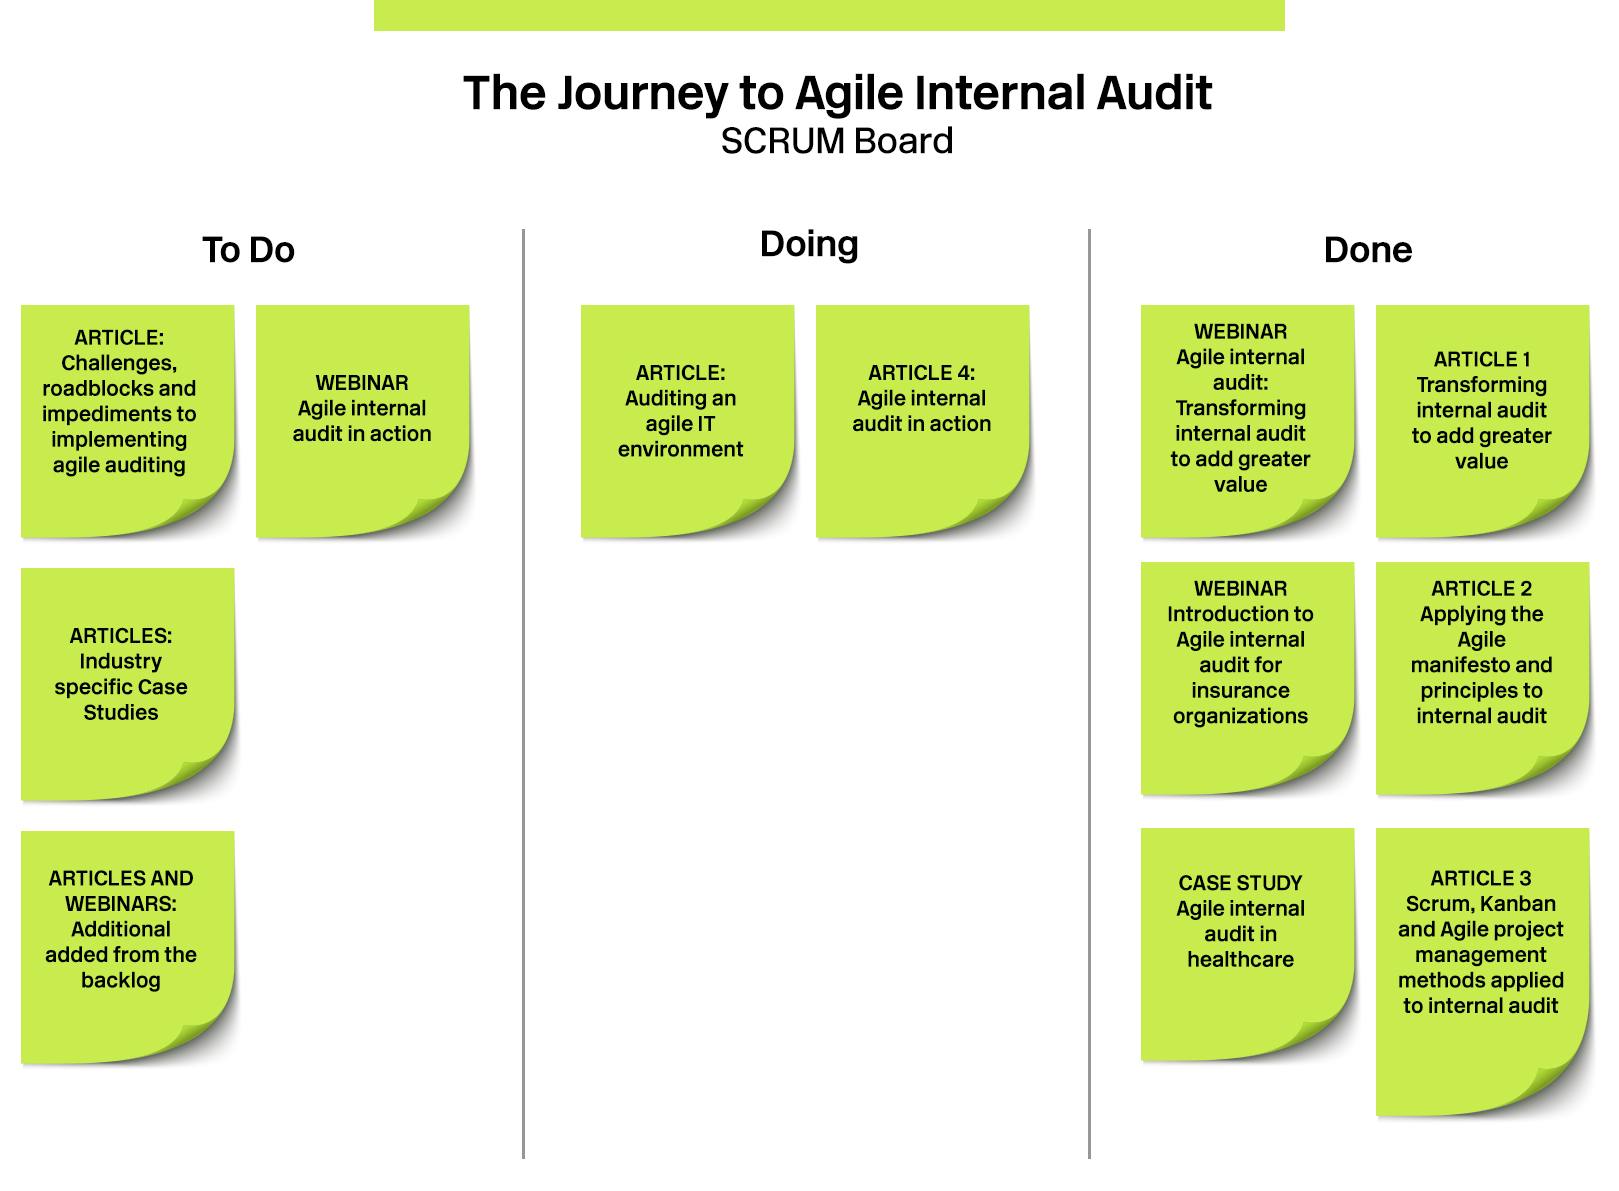 The Journey to Agile Internal Audit | SCRUM board